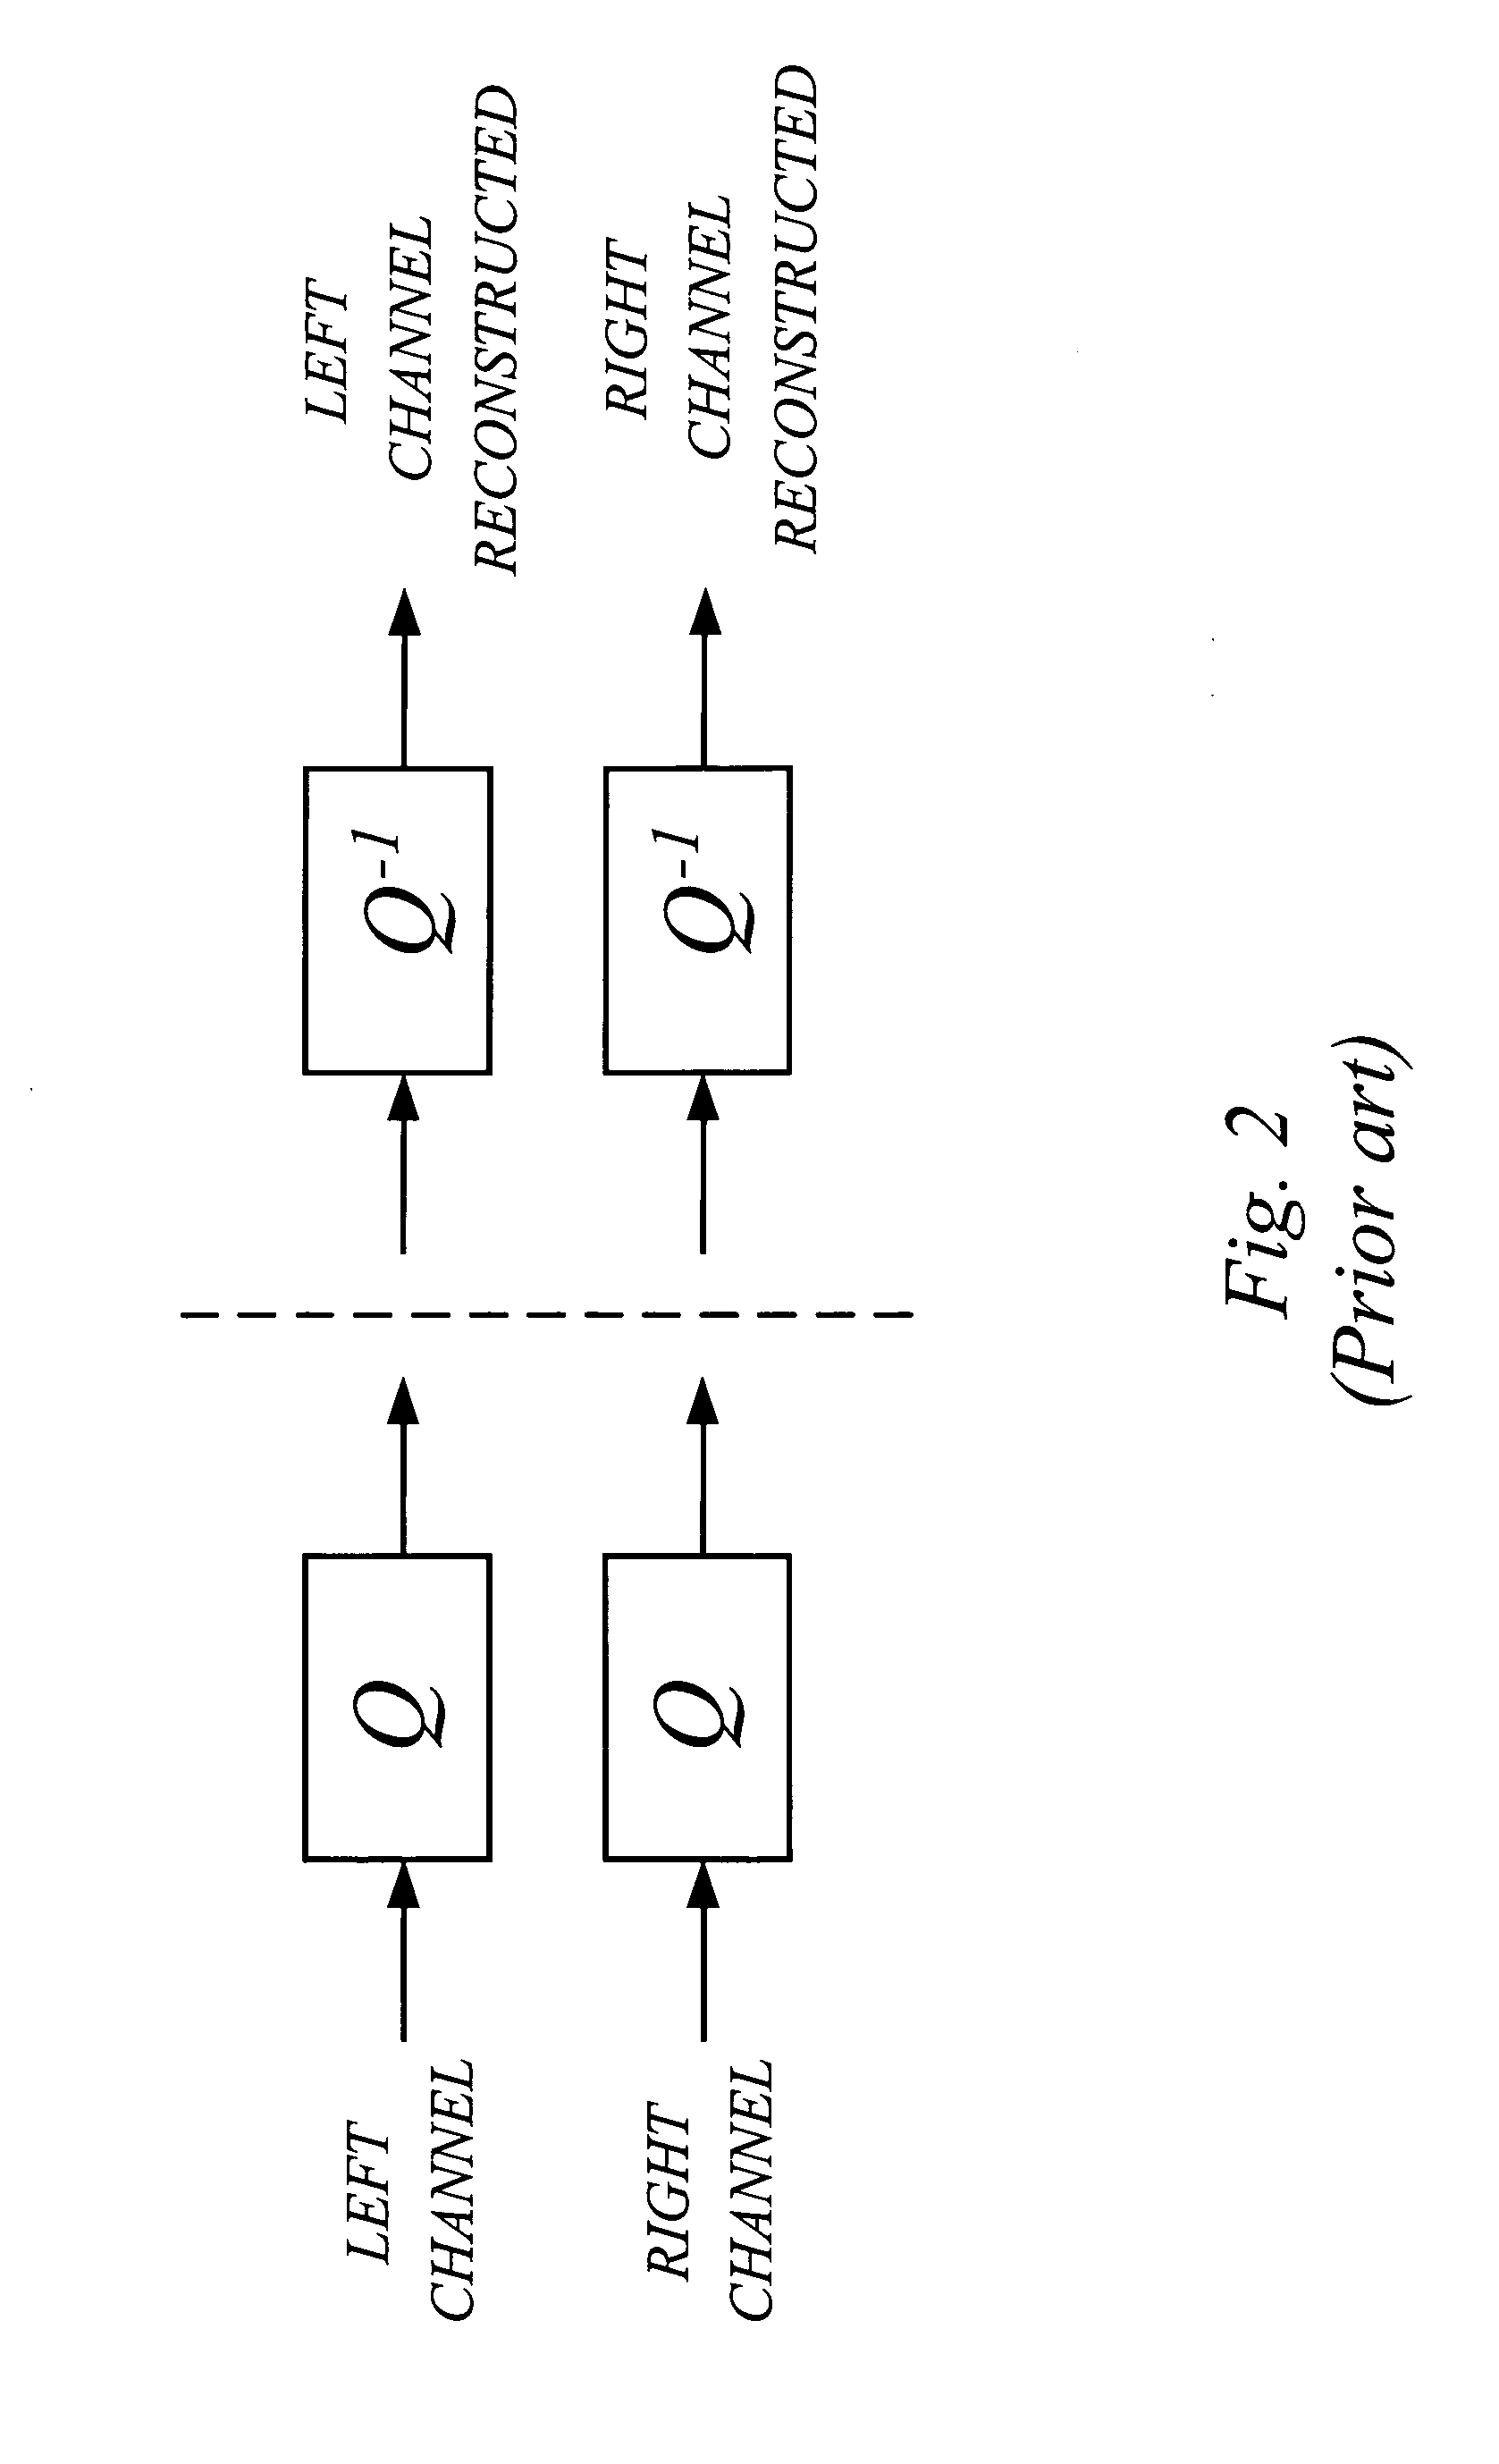 Filter smoothing in multi-channel audio encoding and/or decoding